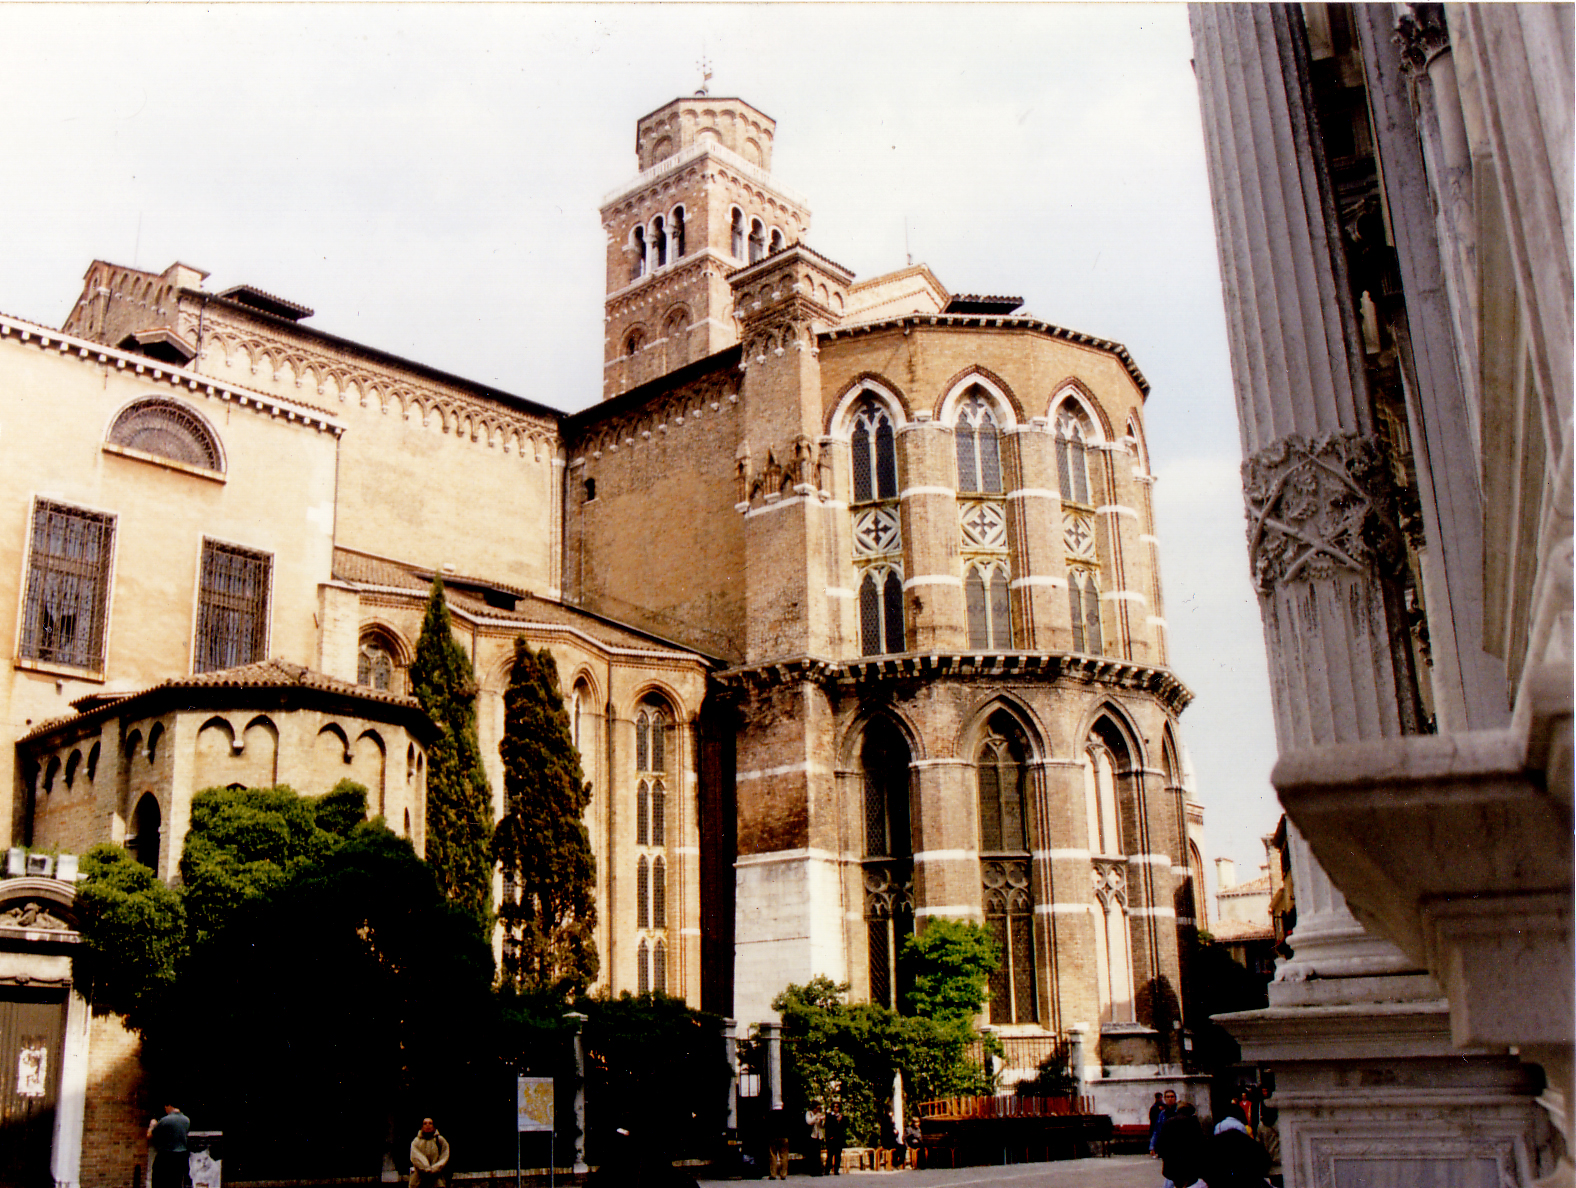 Apse of the church of the Frari to the left, and base and fluted column of the Scuola di San Rocco to the right